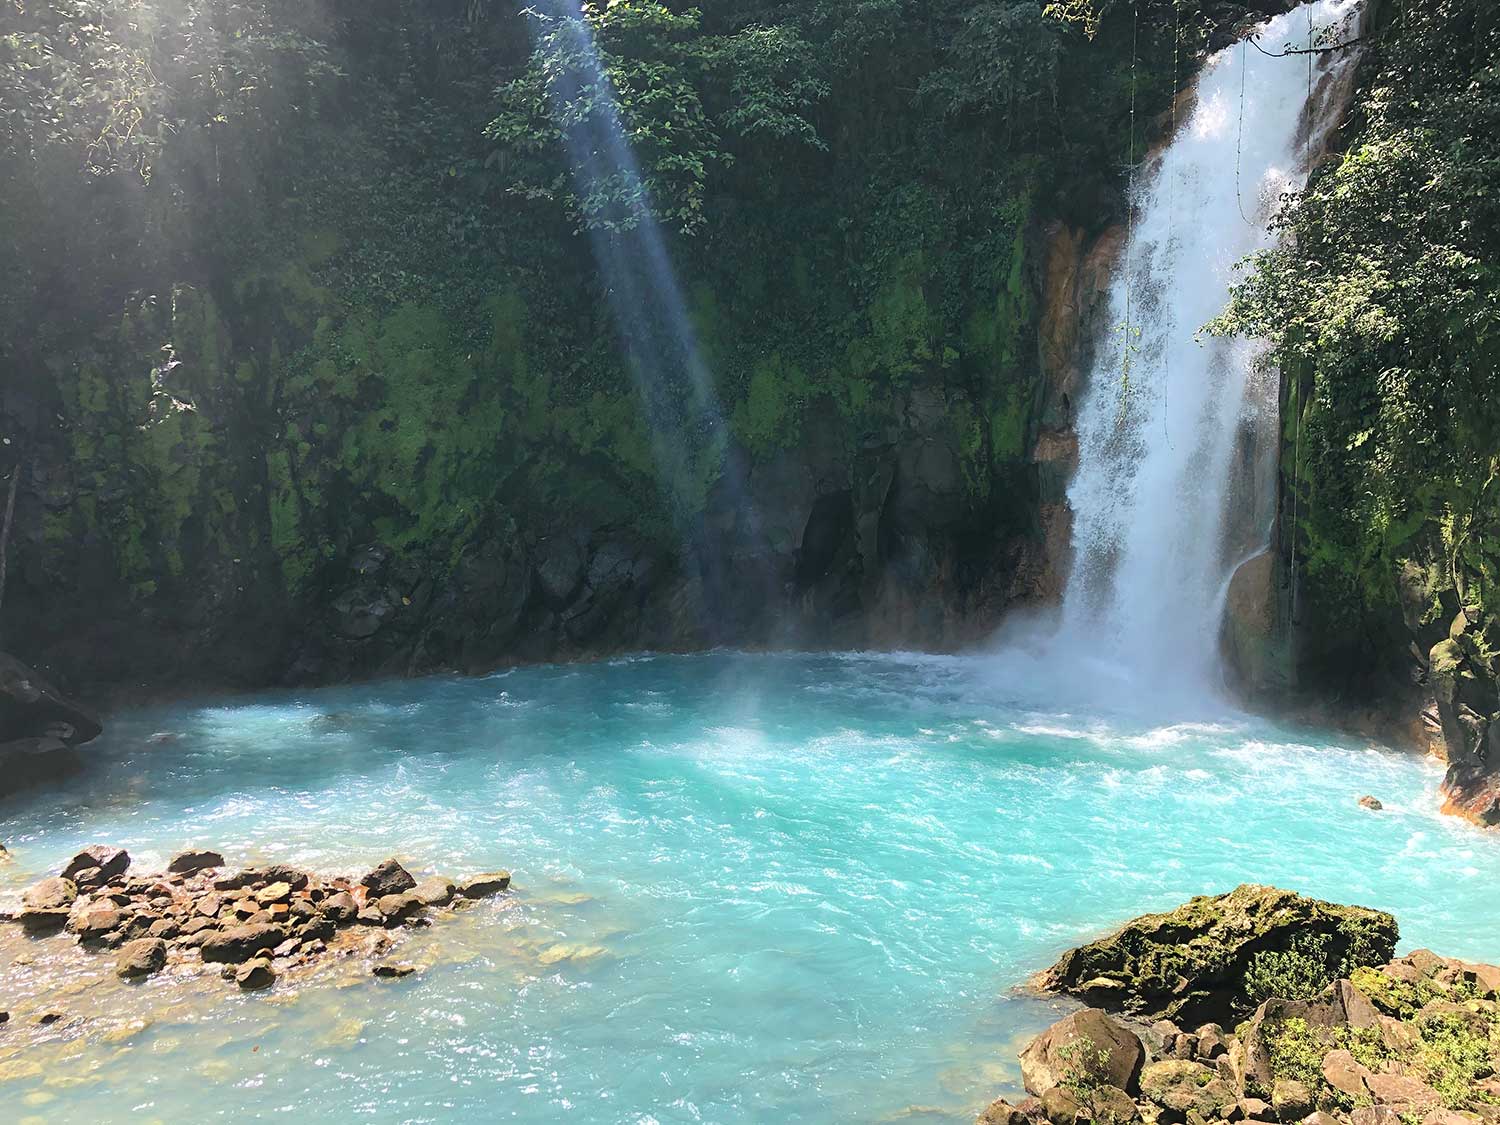 Rio Celeste is packed full of natural beauty